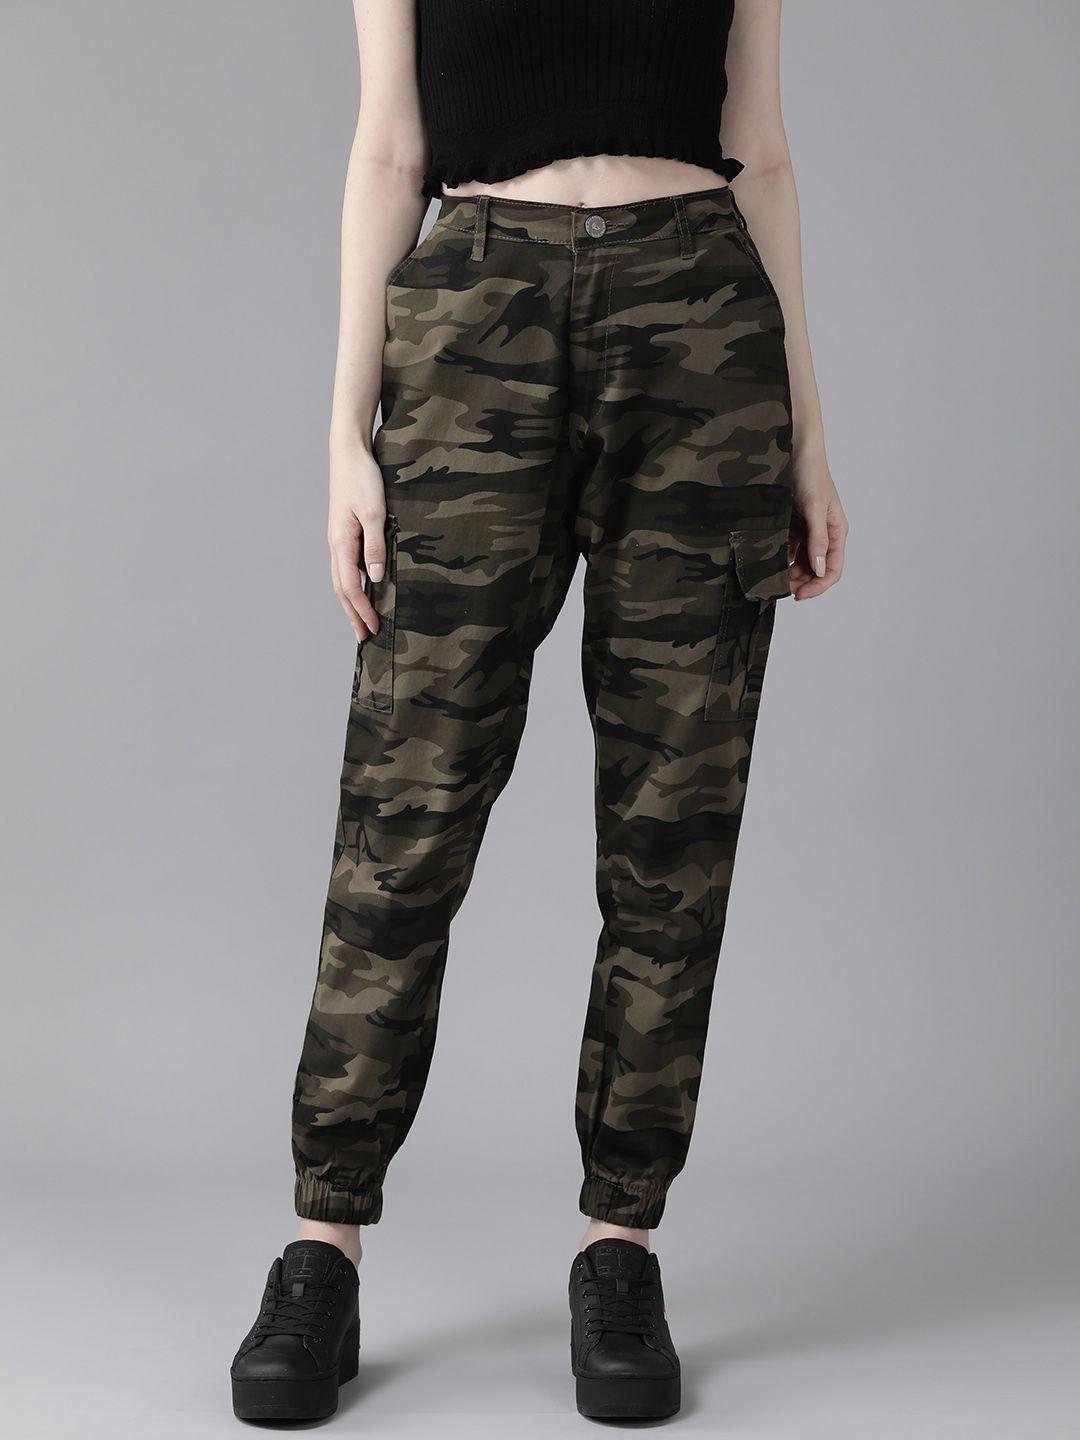 the-dry-state-women-camouflage-print-cargo-style-joggers